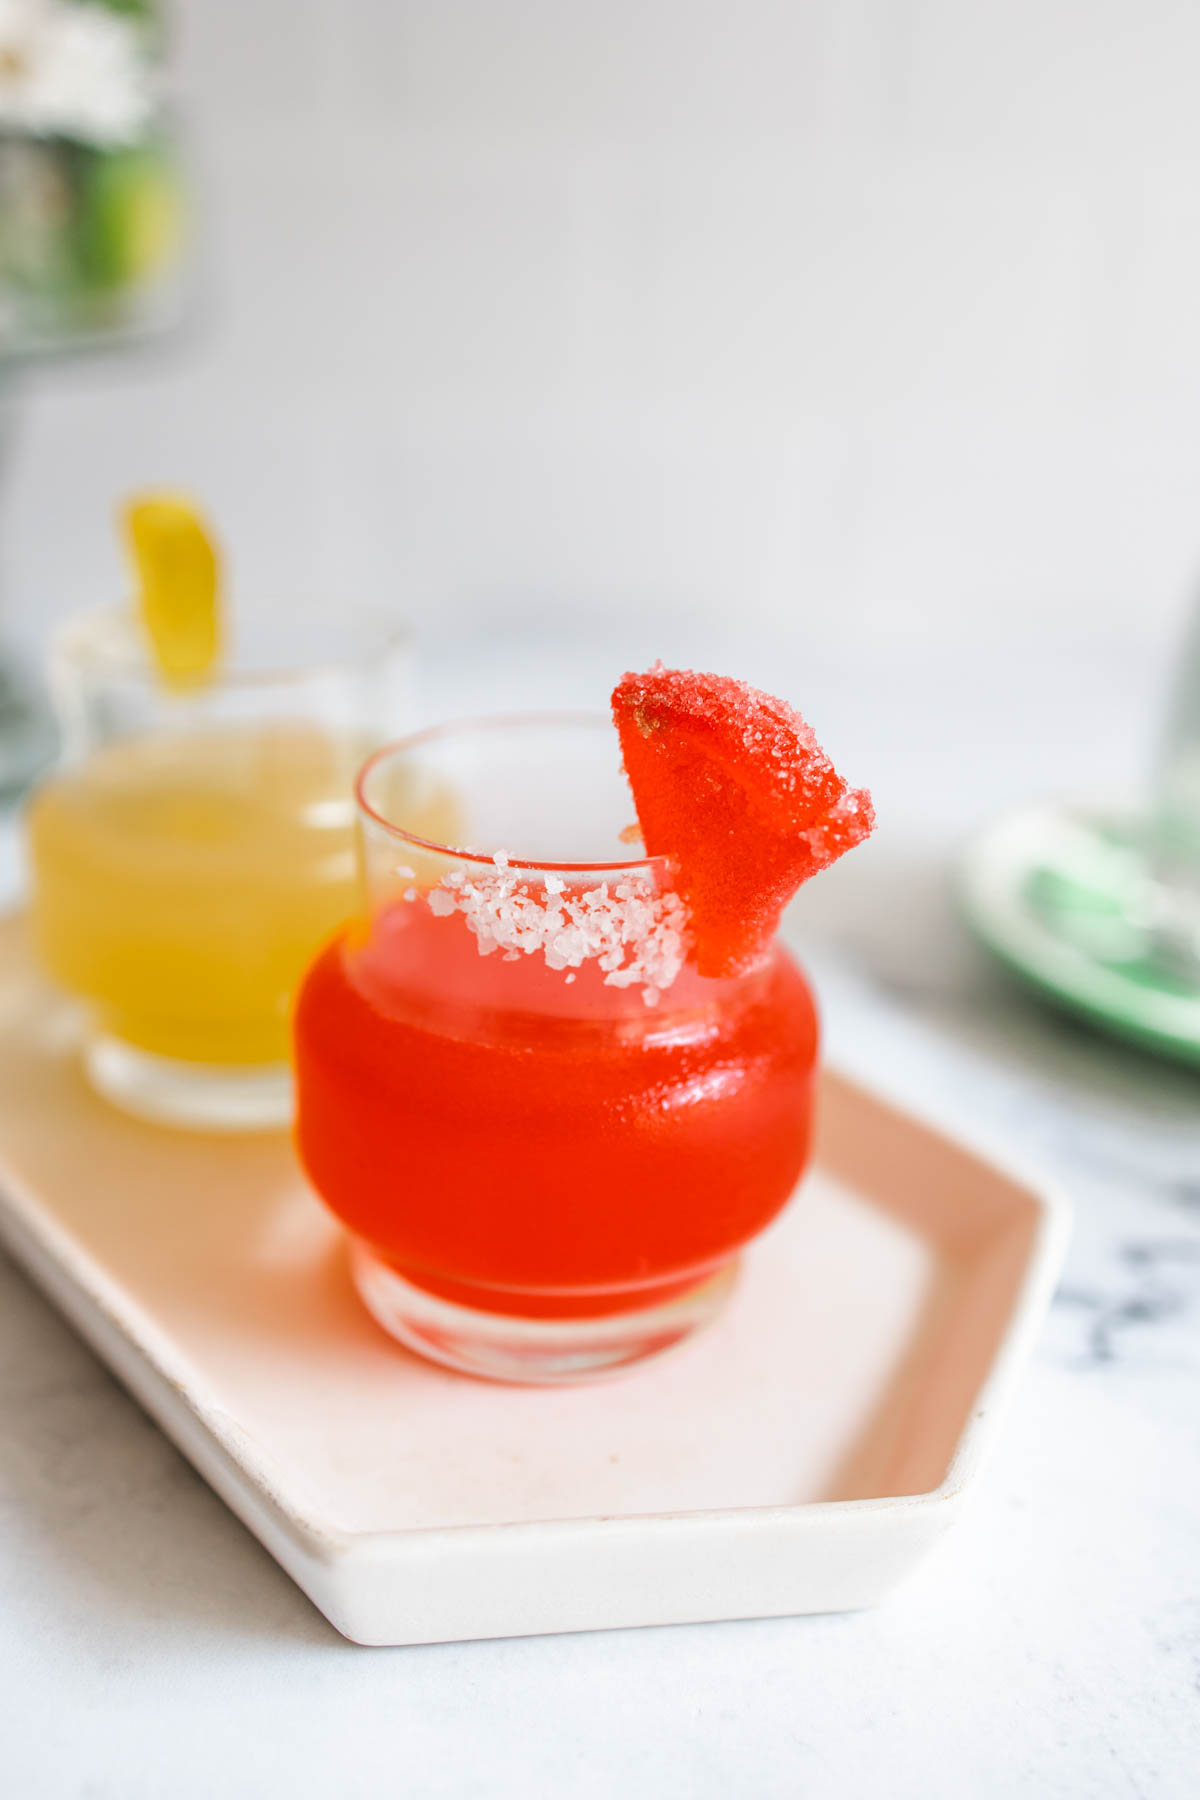 A deliciously red Deadpool Margarita in a glass with salt rim garnished with a candy watermelon slice alongside a yellow Wolverine Margarita on a plate.  